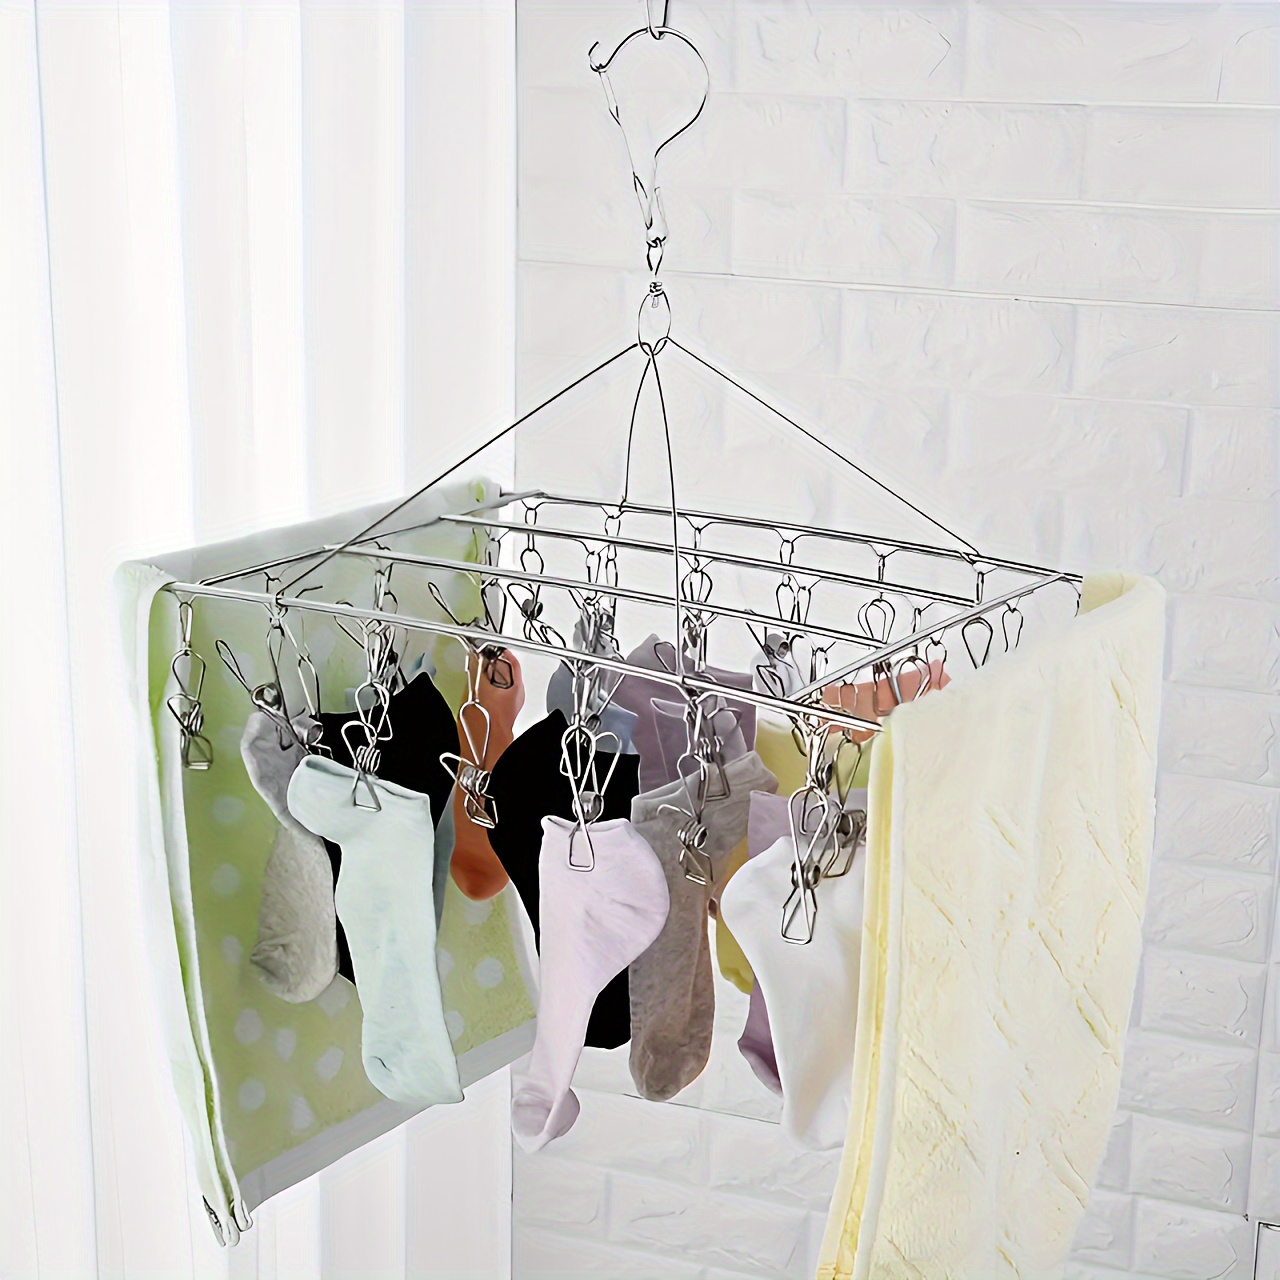 

1pc Stainless Steel Drying Rack With 20 Clips, 360° Rotatable Hook, Windproof Rust-resistant Hanging Clothespin Holder For Socks, Bras, Underwear, Laundry Accessories